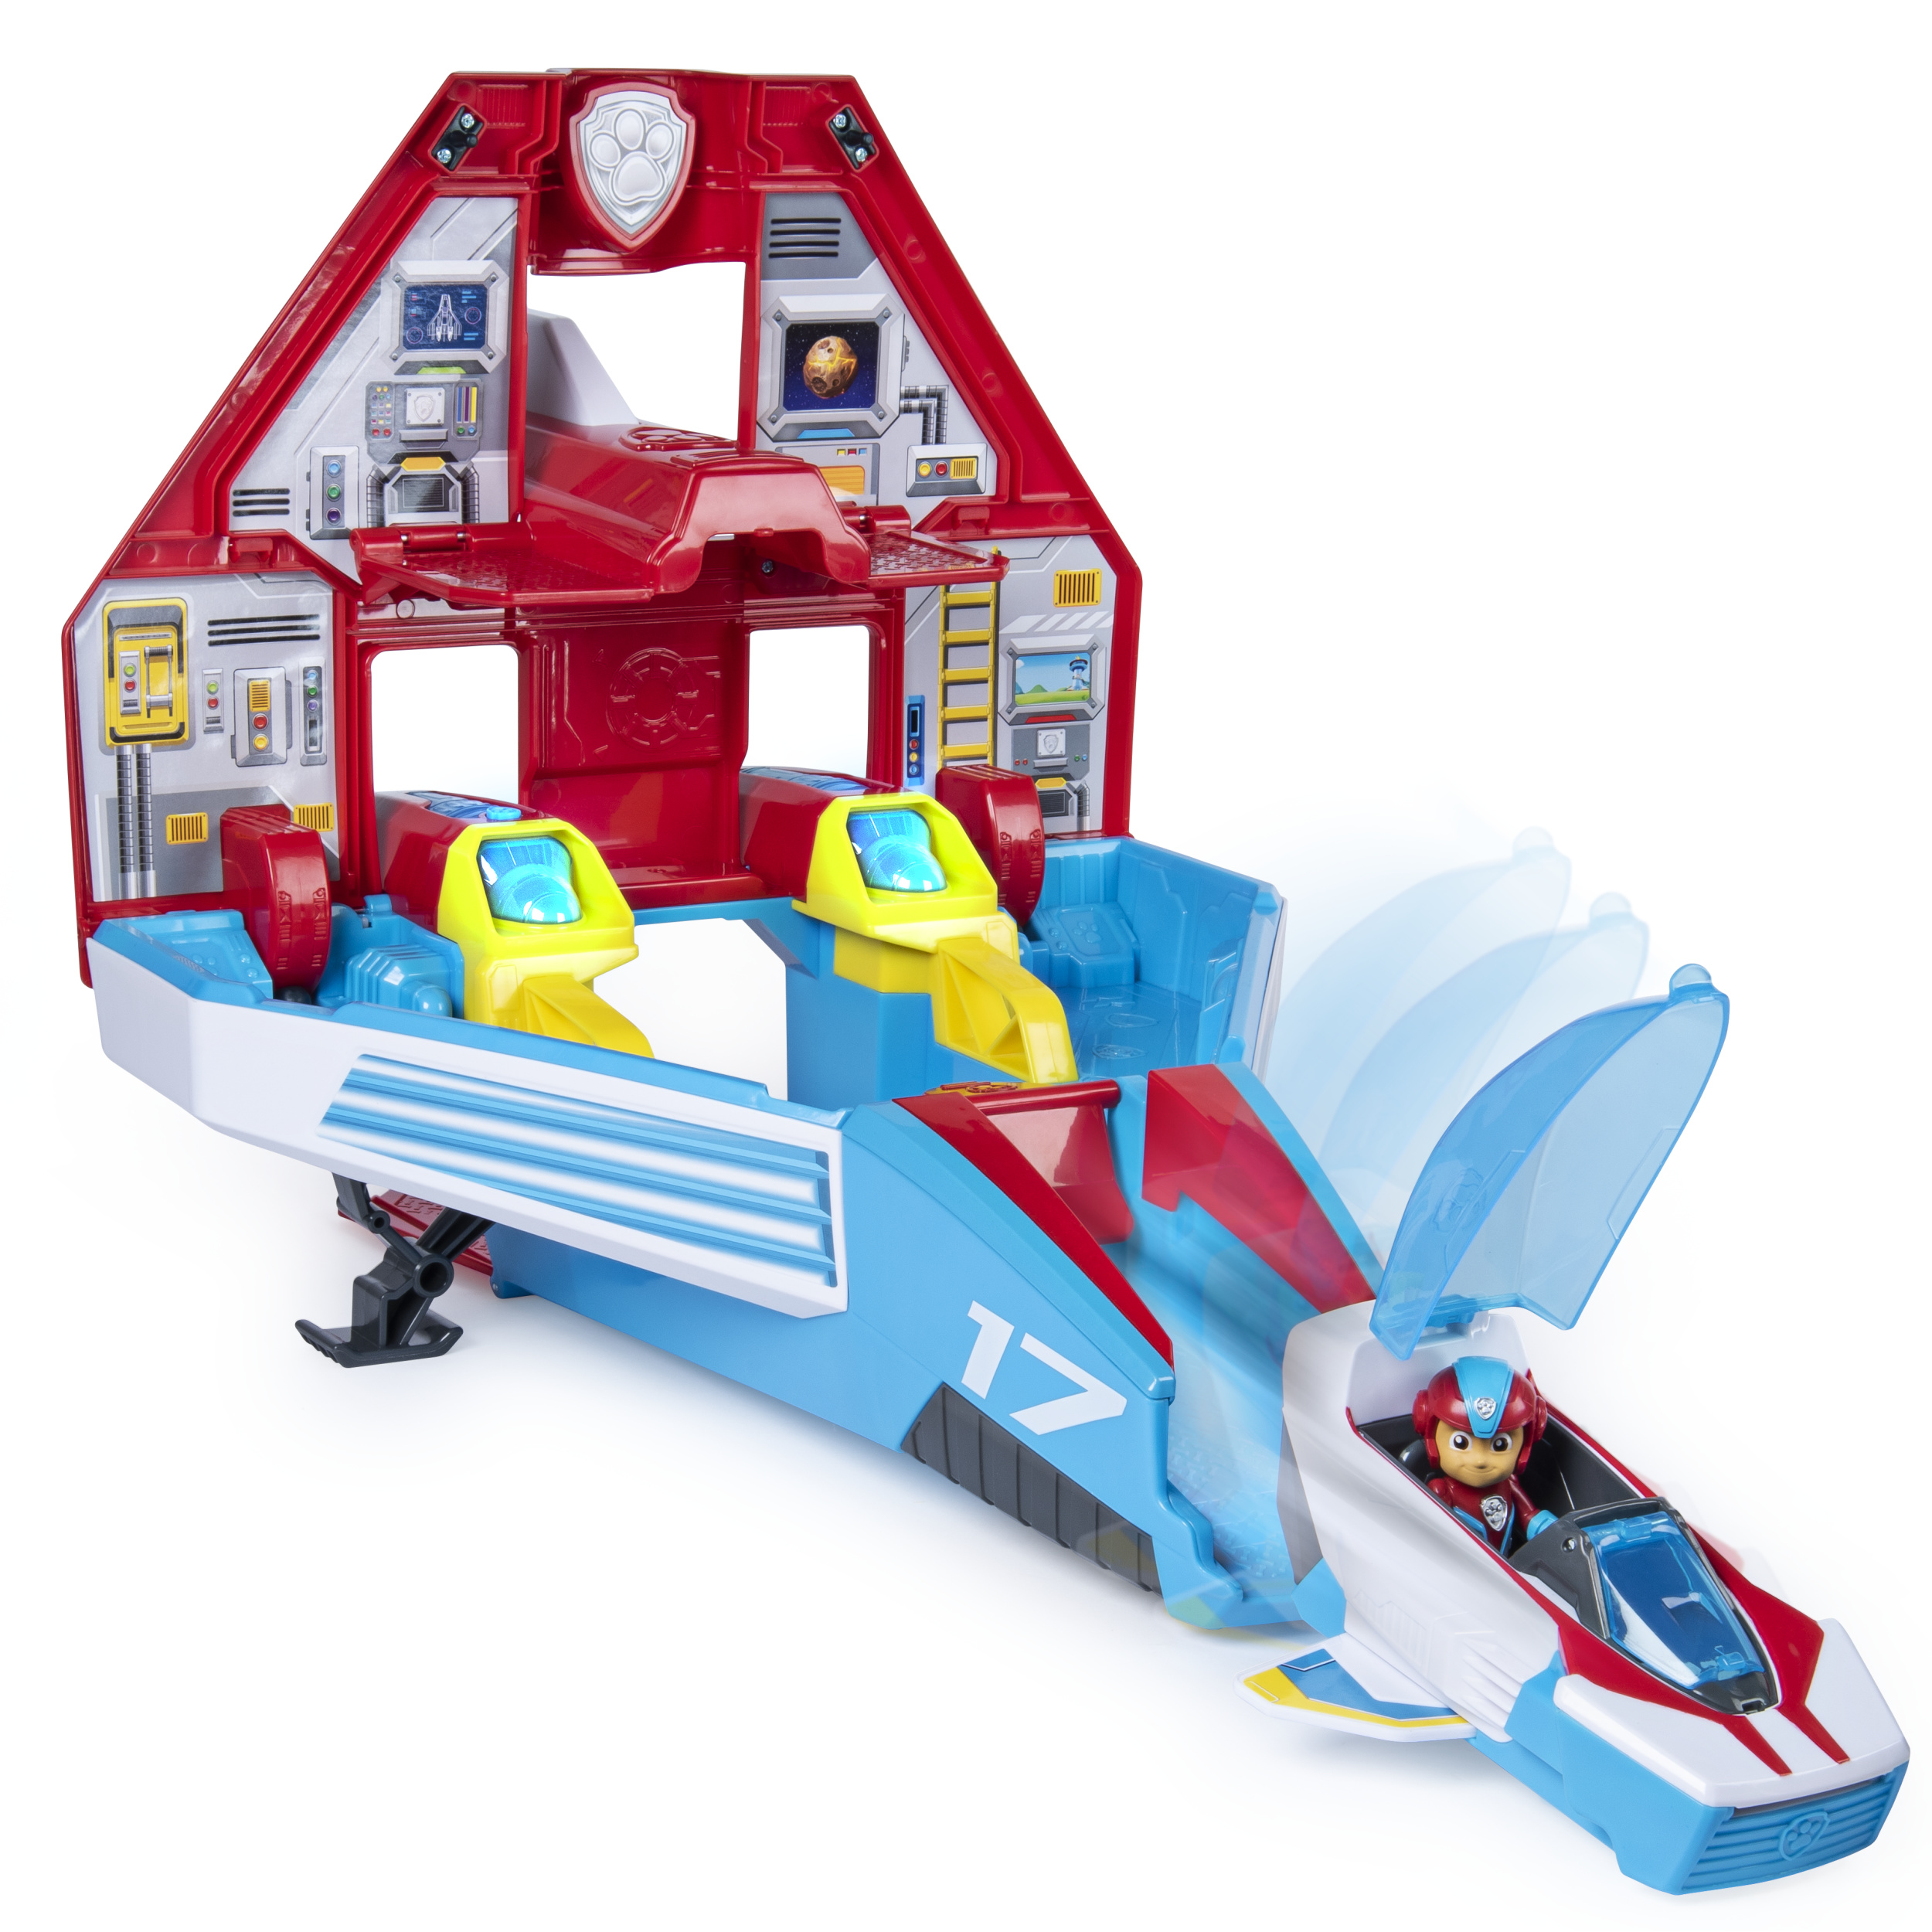 Paw Patrol , Super PAWs, 2-in-1 Transforming Mighty Pups Jet Command Center with Lights and Sounds